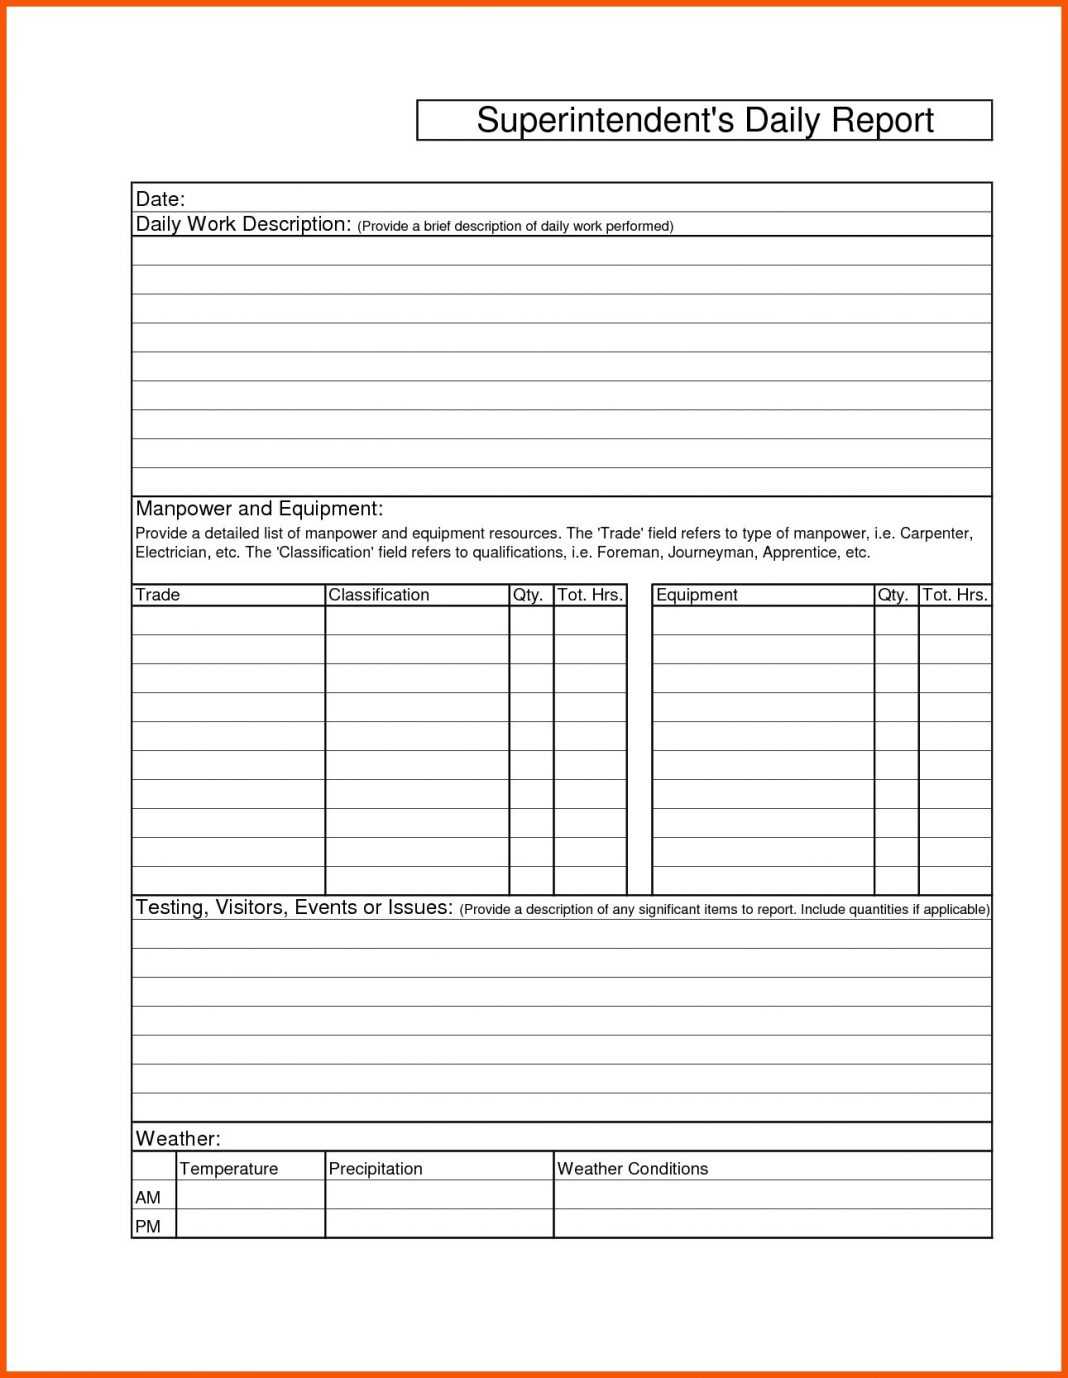 021 Daily Work Report Template Xls Ideas 20Daily Iwsp5 Throughout Daily Work Report Template